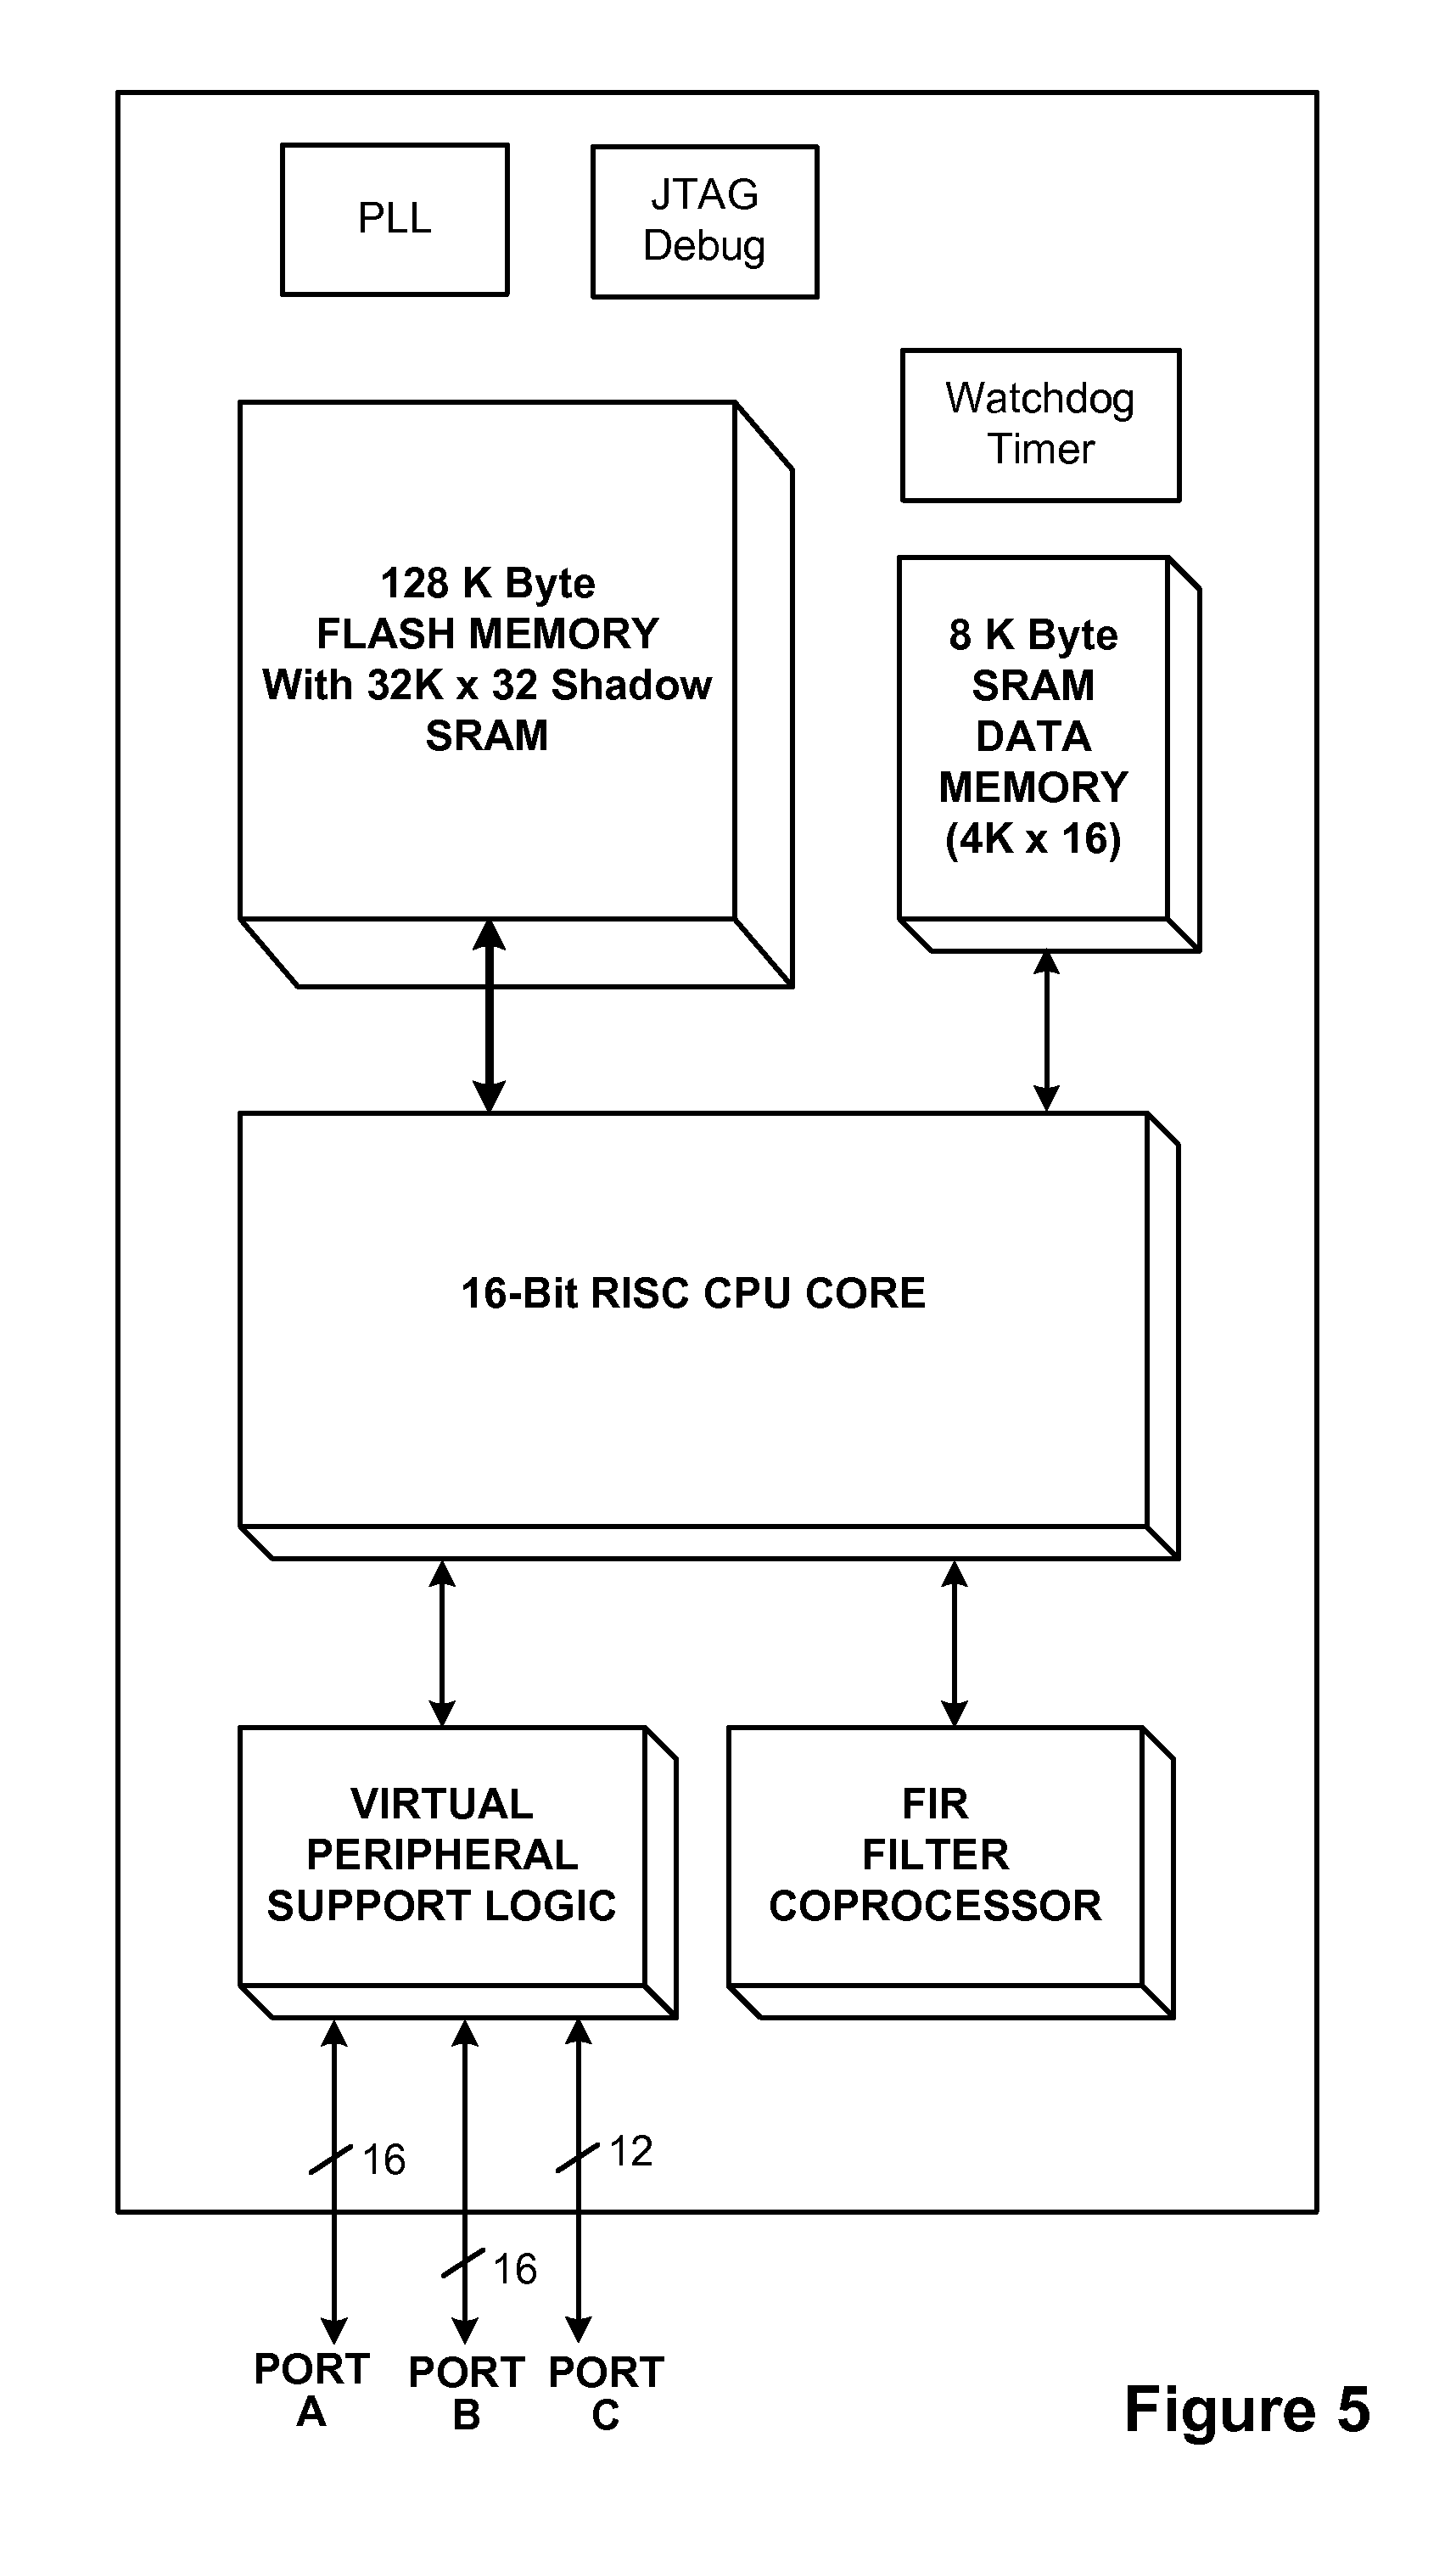 Instruction-level multithreading according to a predetermined fixed schedule in an embedded processor using zero-time context switching